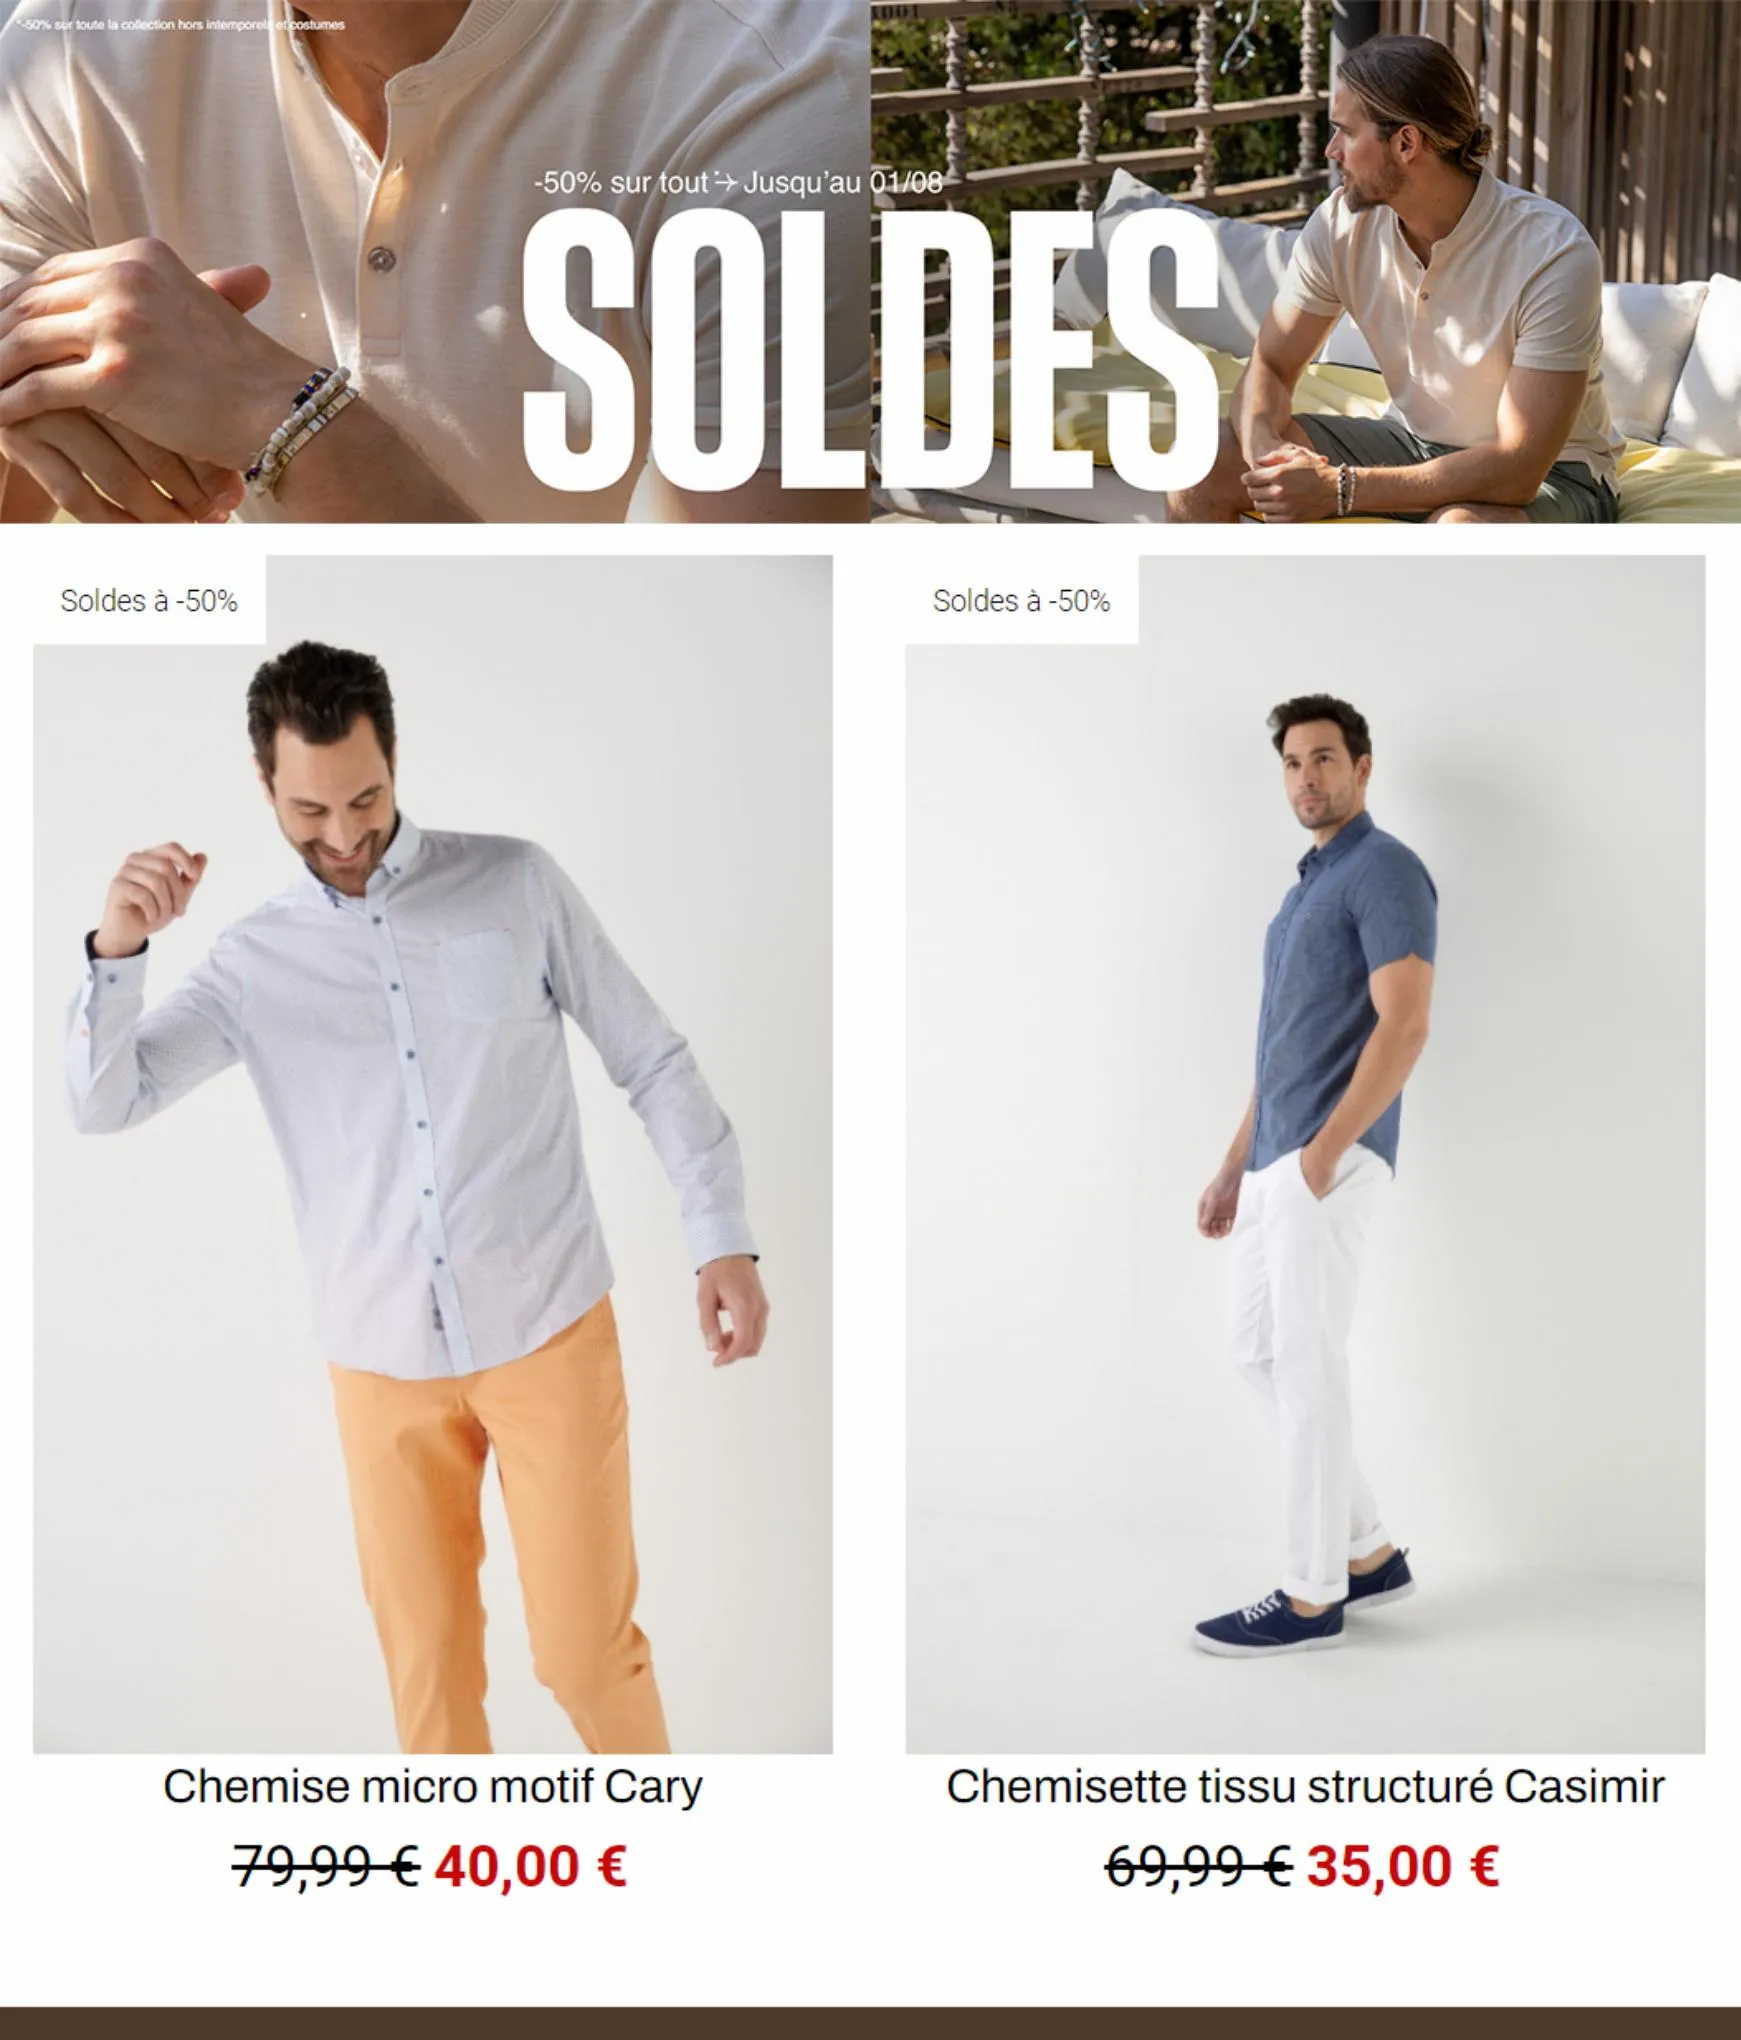 Catalogue SOLDES -50%!, page 00005